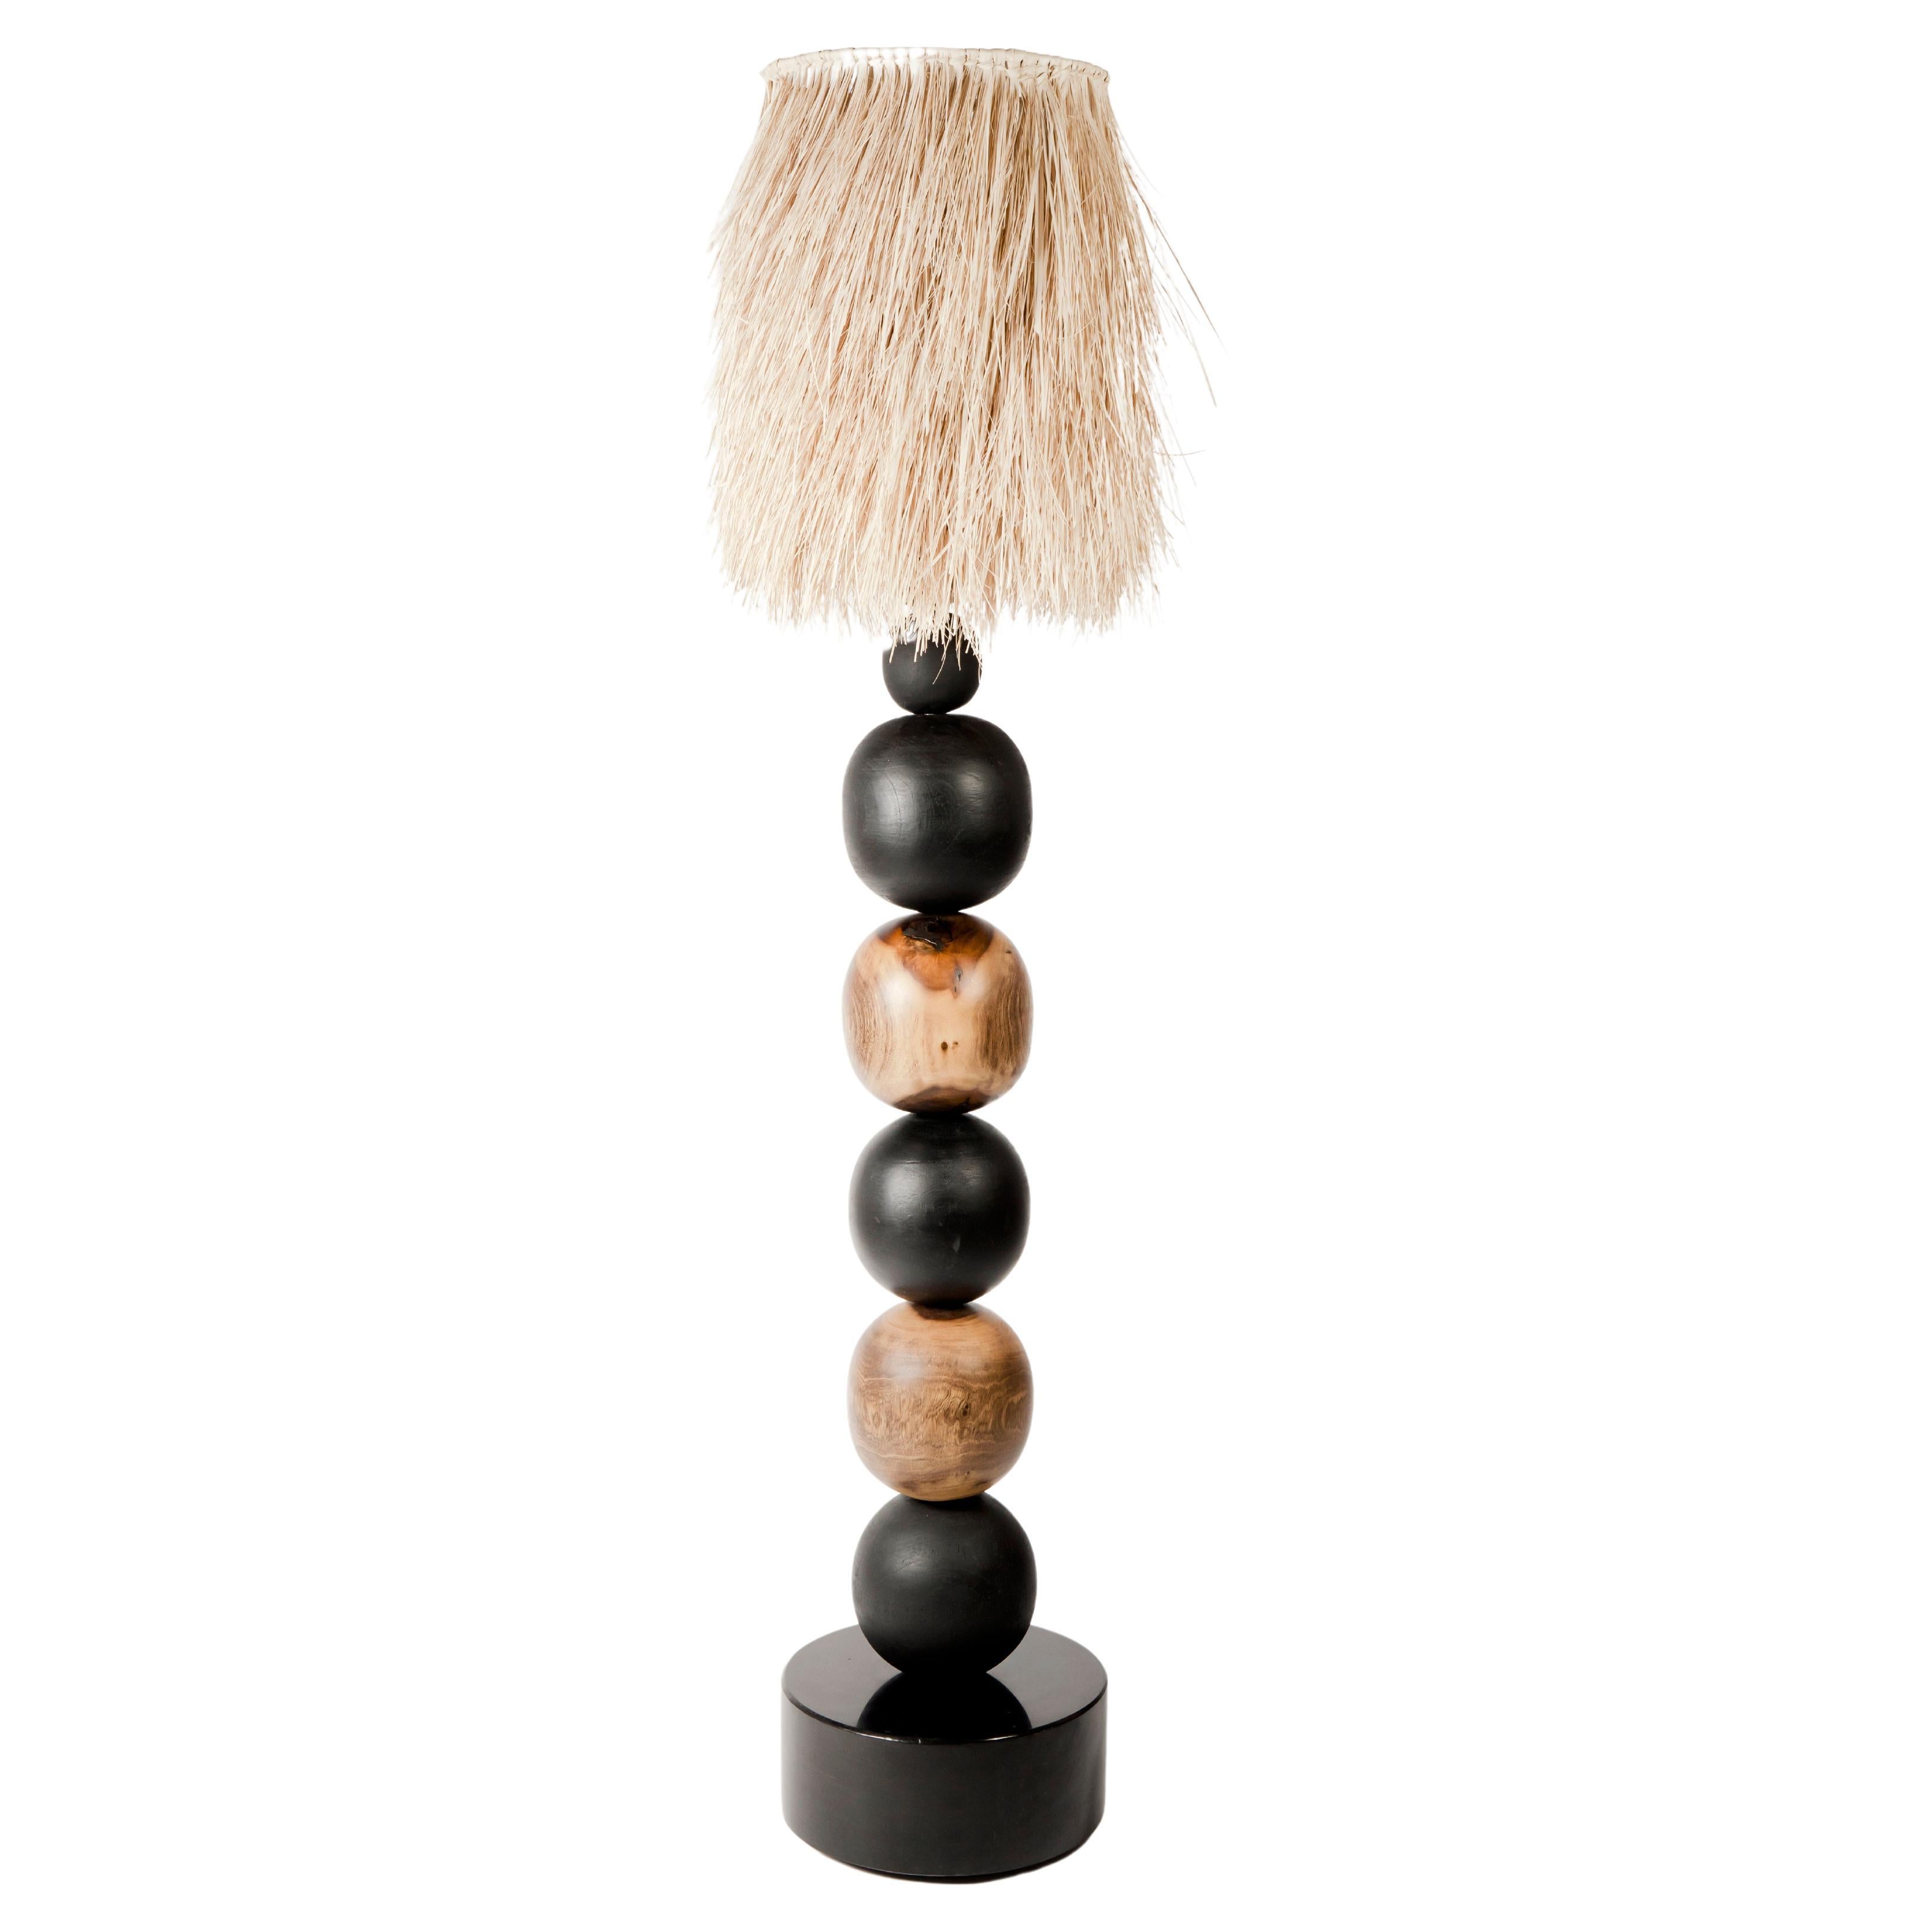 Wooden Spheres Floor Lamp with Palm Screen by Daniel Orozco For Sale